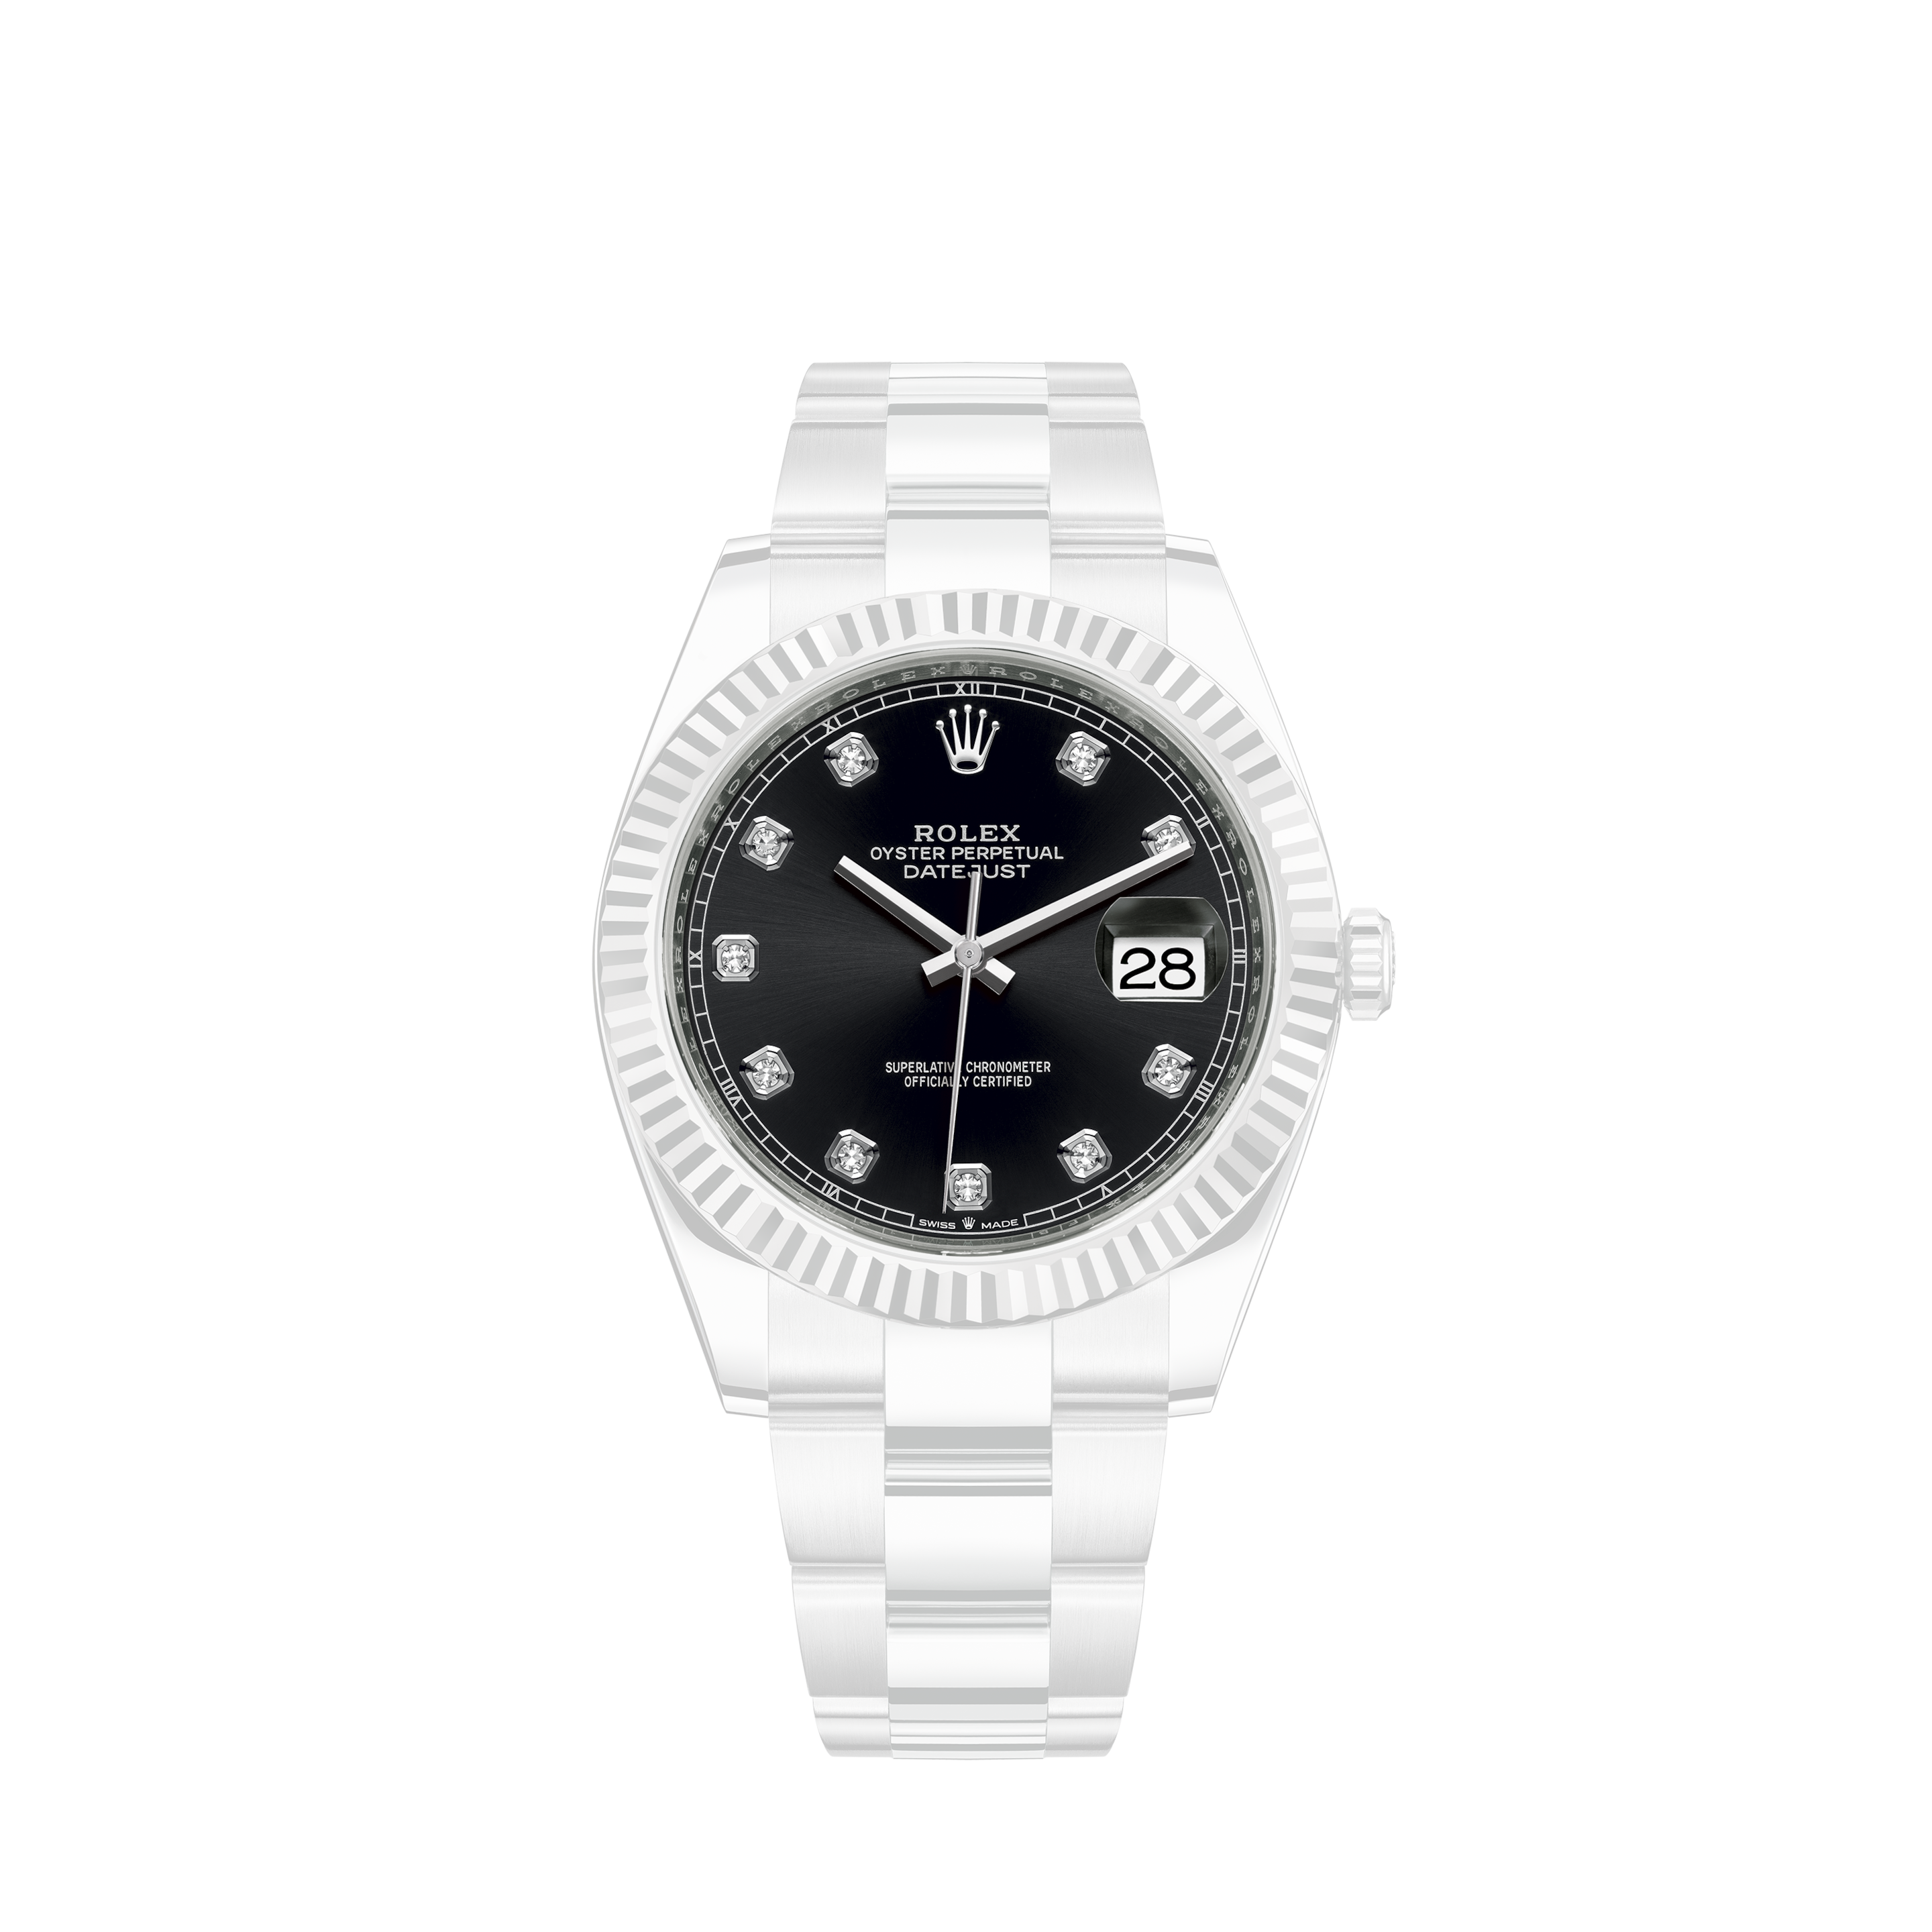 Rolex D Number May 2006 Parallel Galloper Rolex Sea Dweller 16600 Men's Watch Automatic Stainless Steel Black Dial 1220m Waterproof [431]